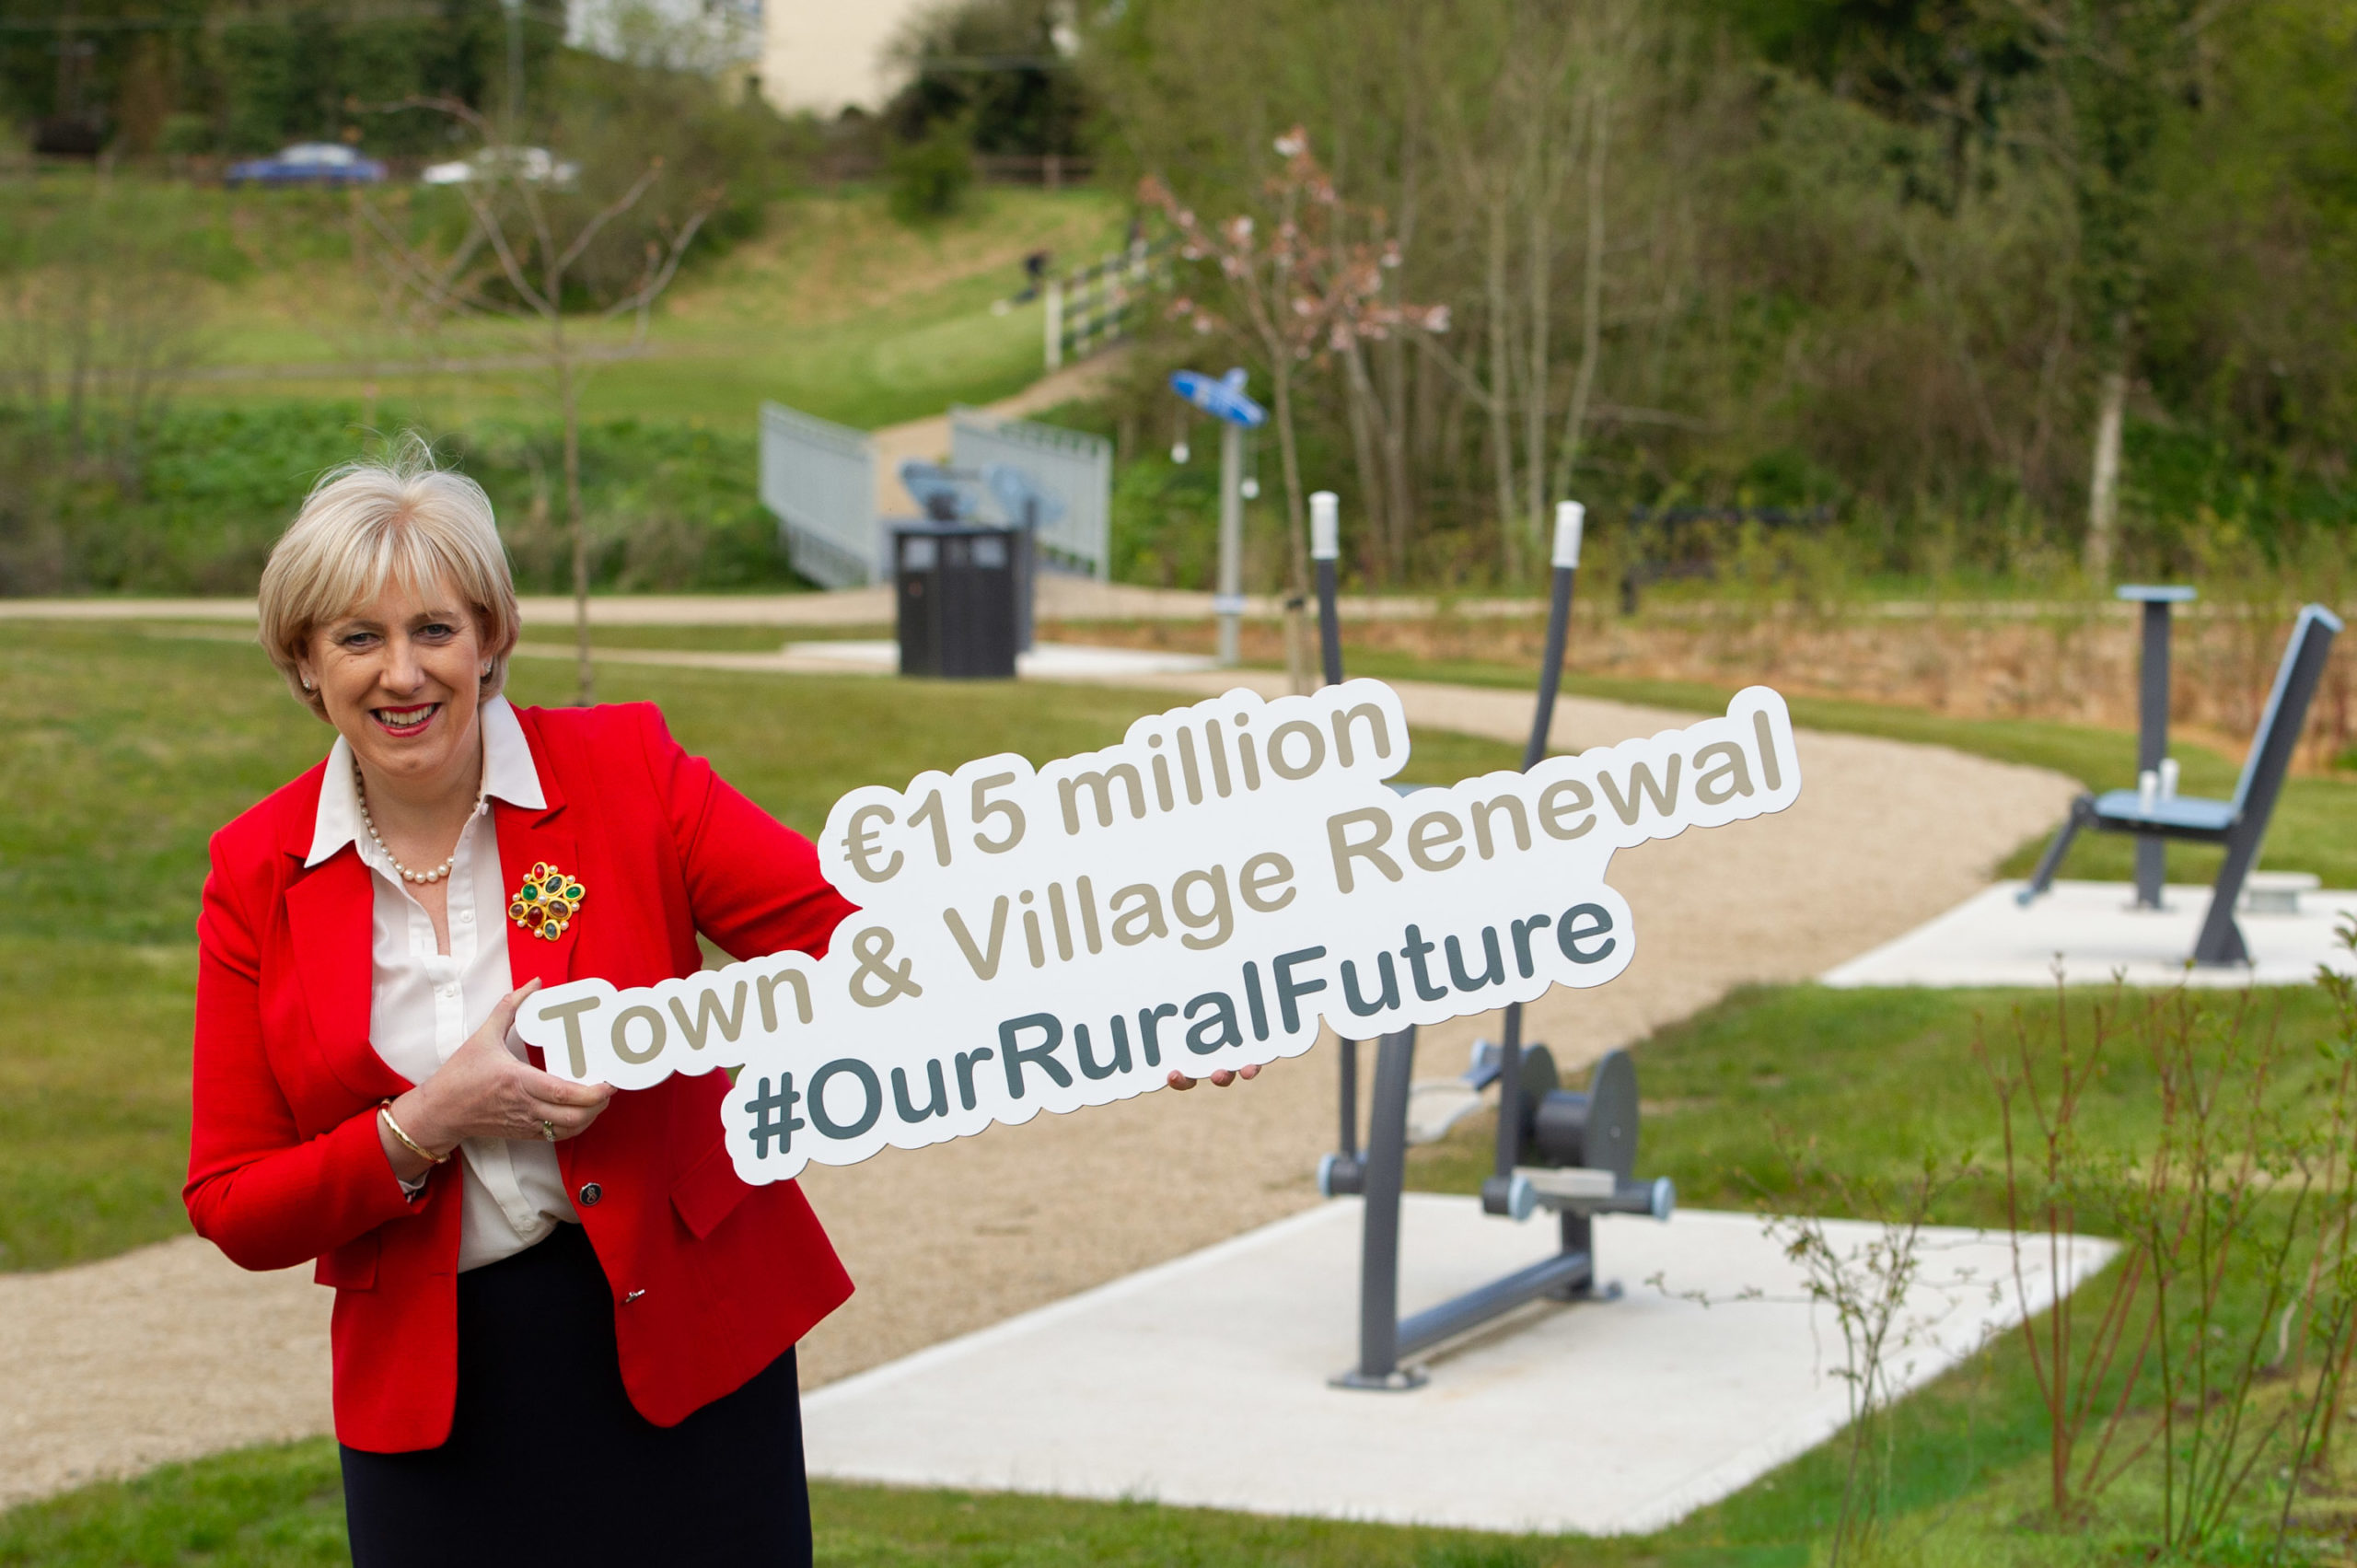 Our Rural Future: Minister Humphreys Announces €15m Fund to Revitalise Rural Towns & Villages